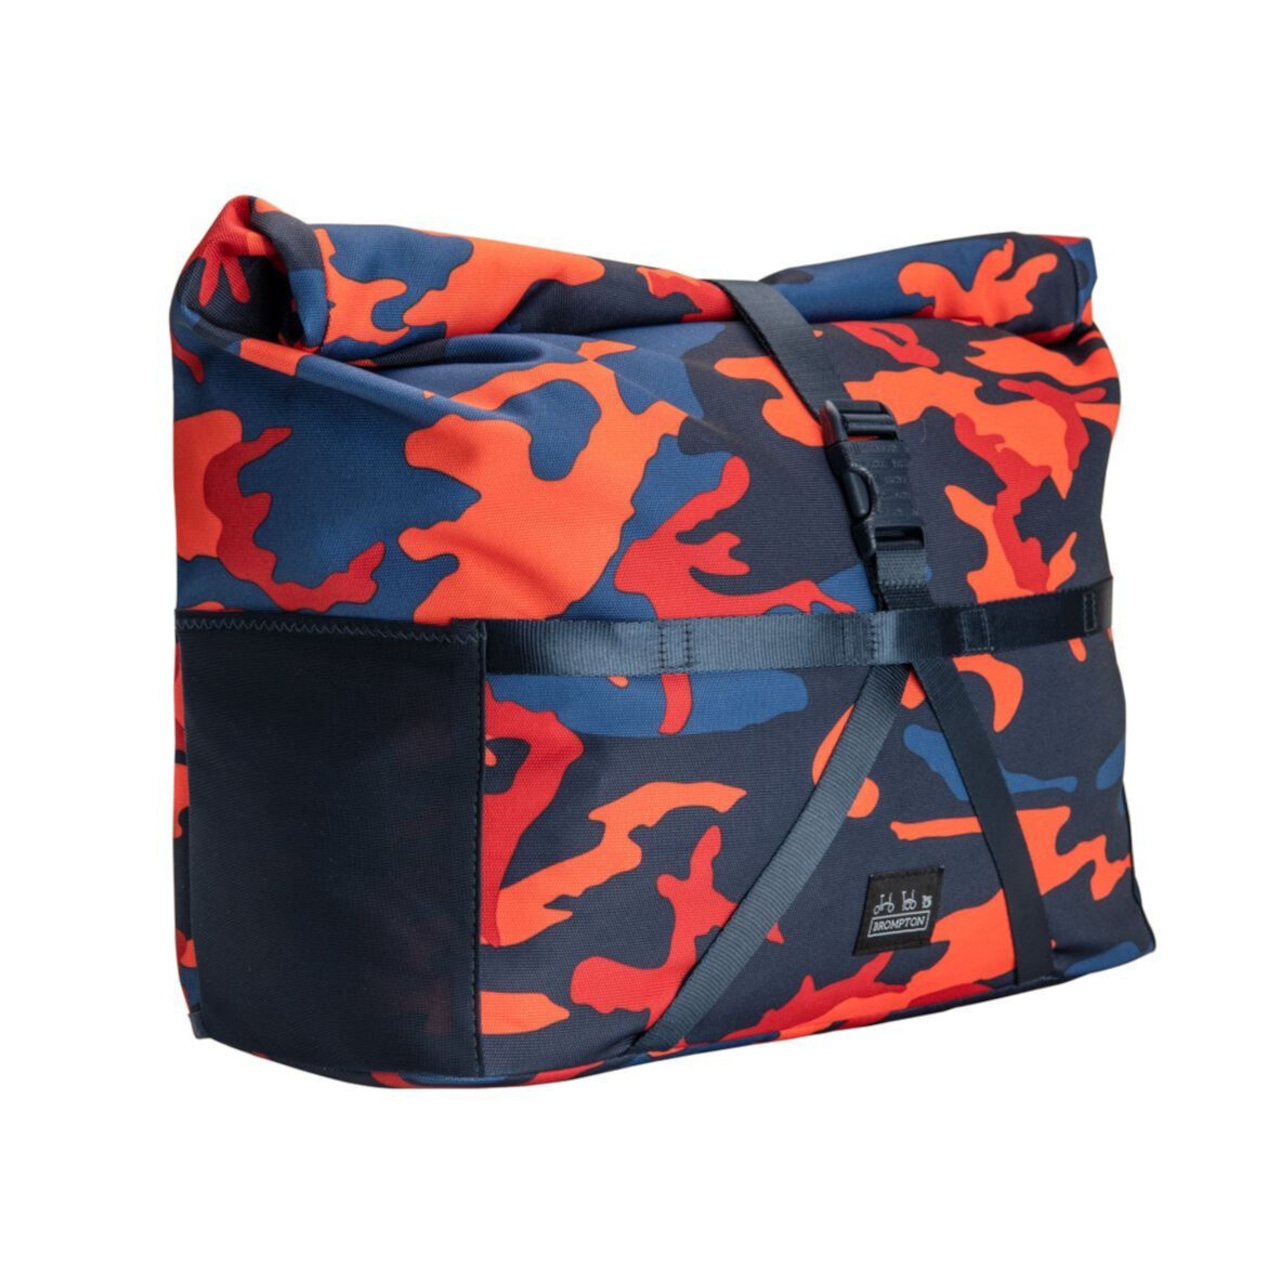 【DPM Print Luggage Collection 2022】Roll Top Bag 14L Camo